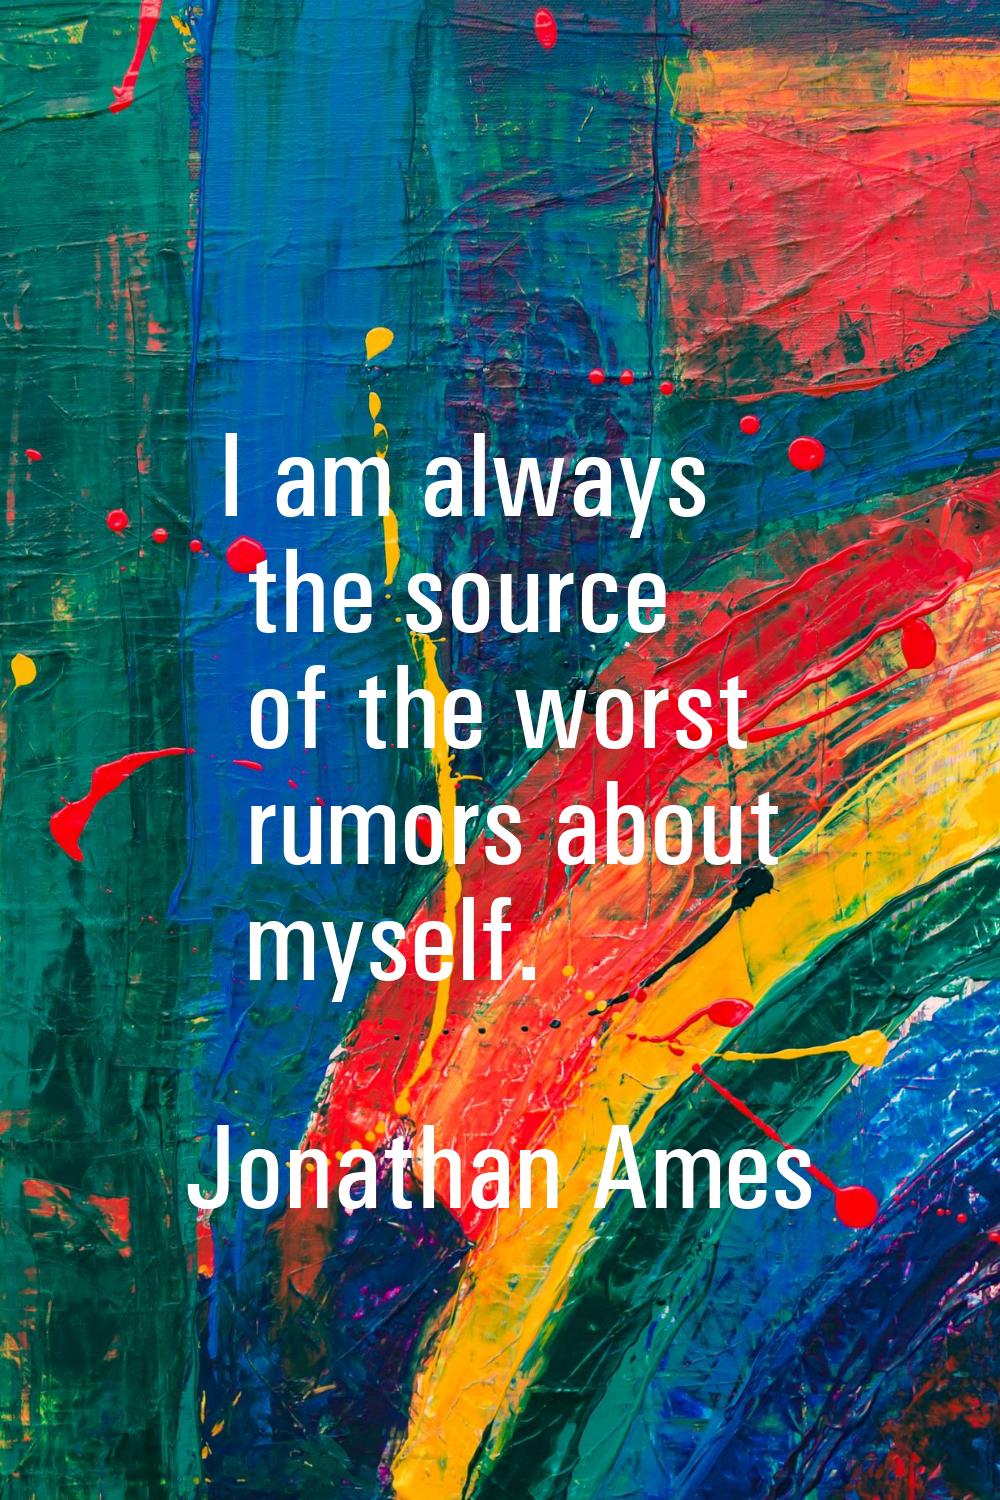 I am always the source of the worst rumors about myself.